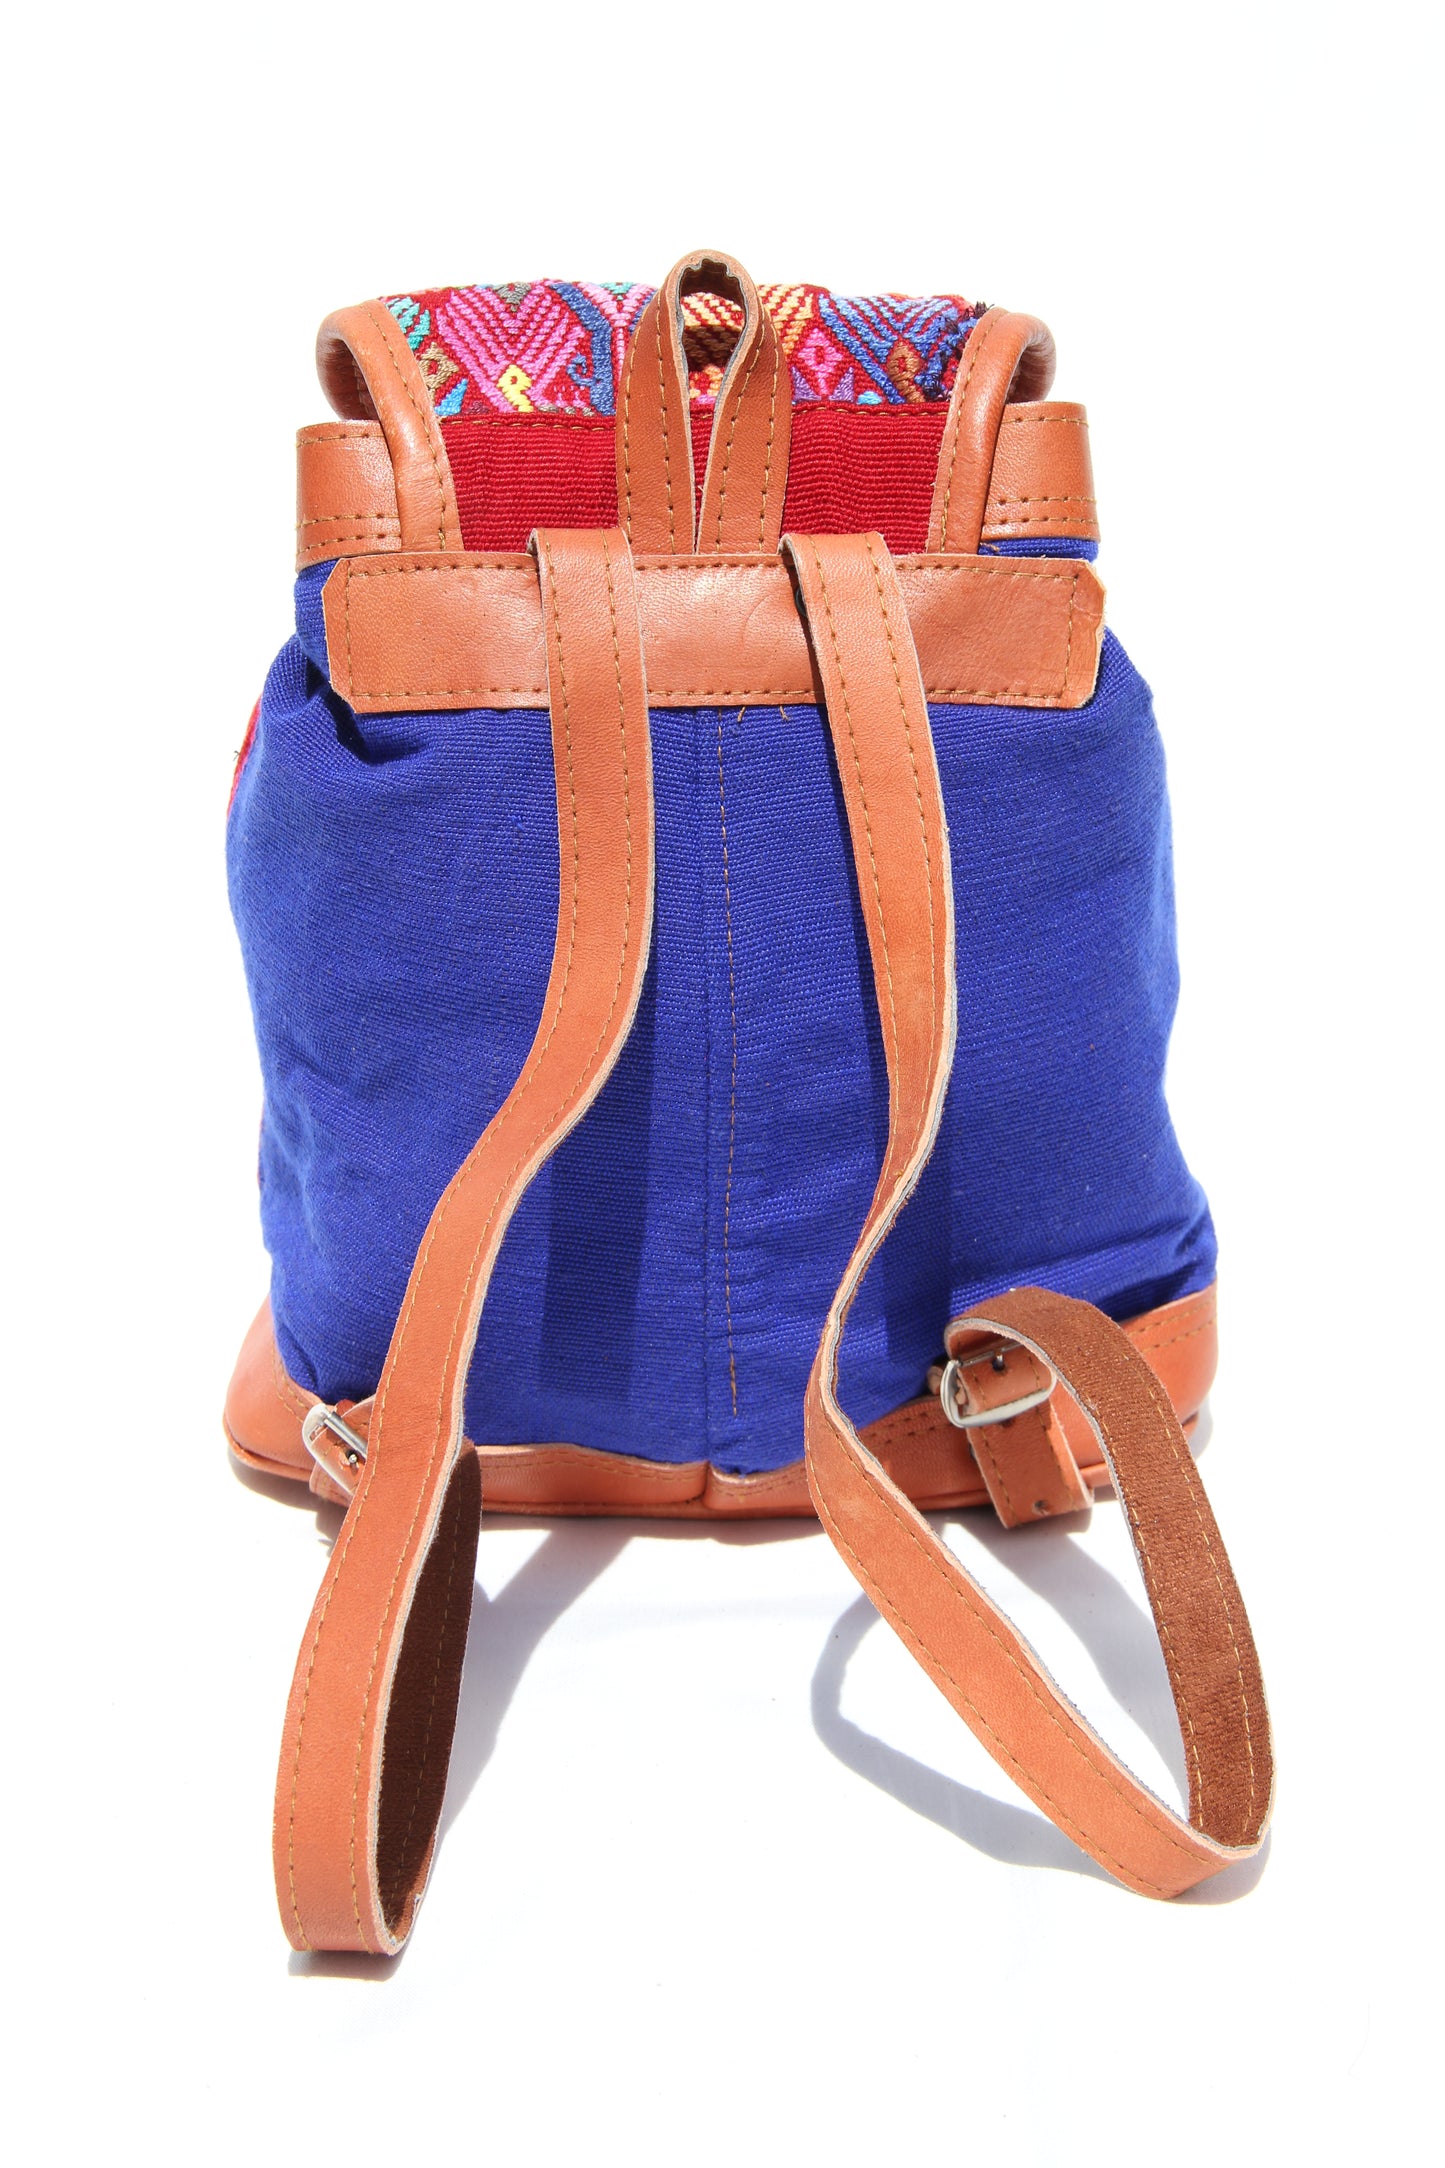 MIni leather huipil backpack hand woven with colorful embroidery and adjustable leather straps with front belt buckle closure and front zipper pocket perfect for hiking or beach trip